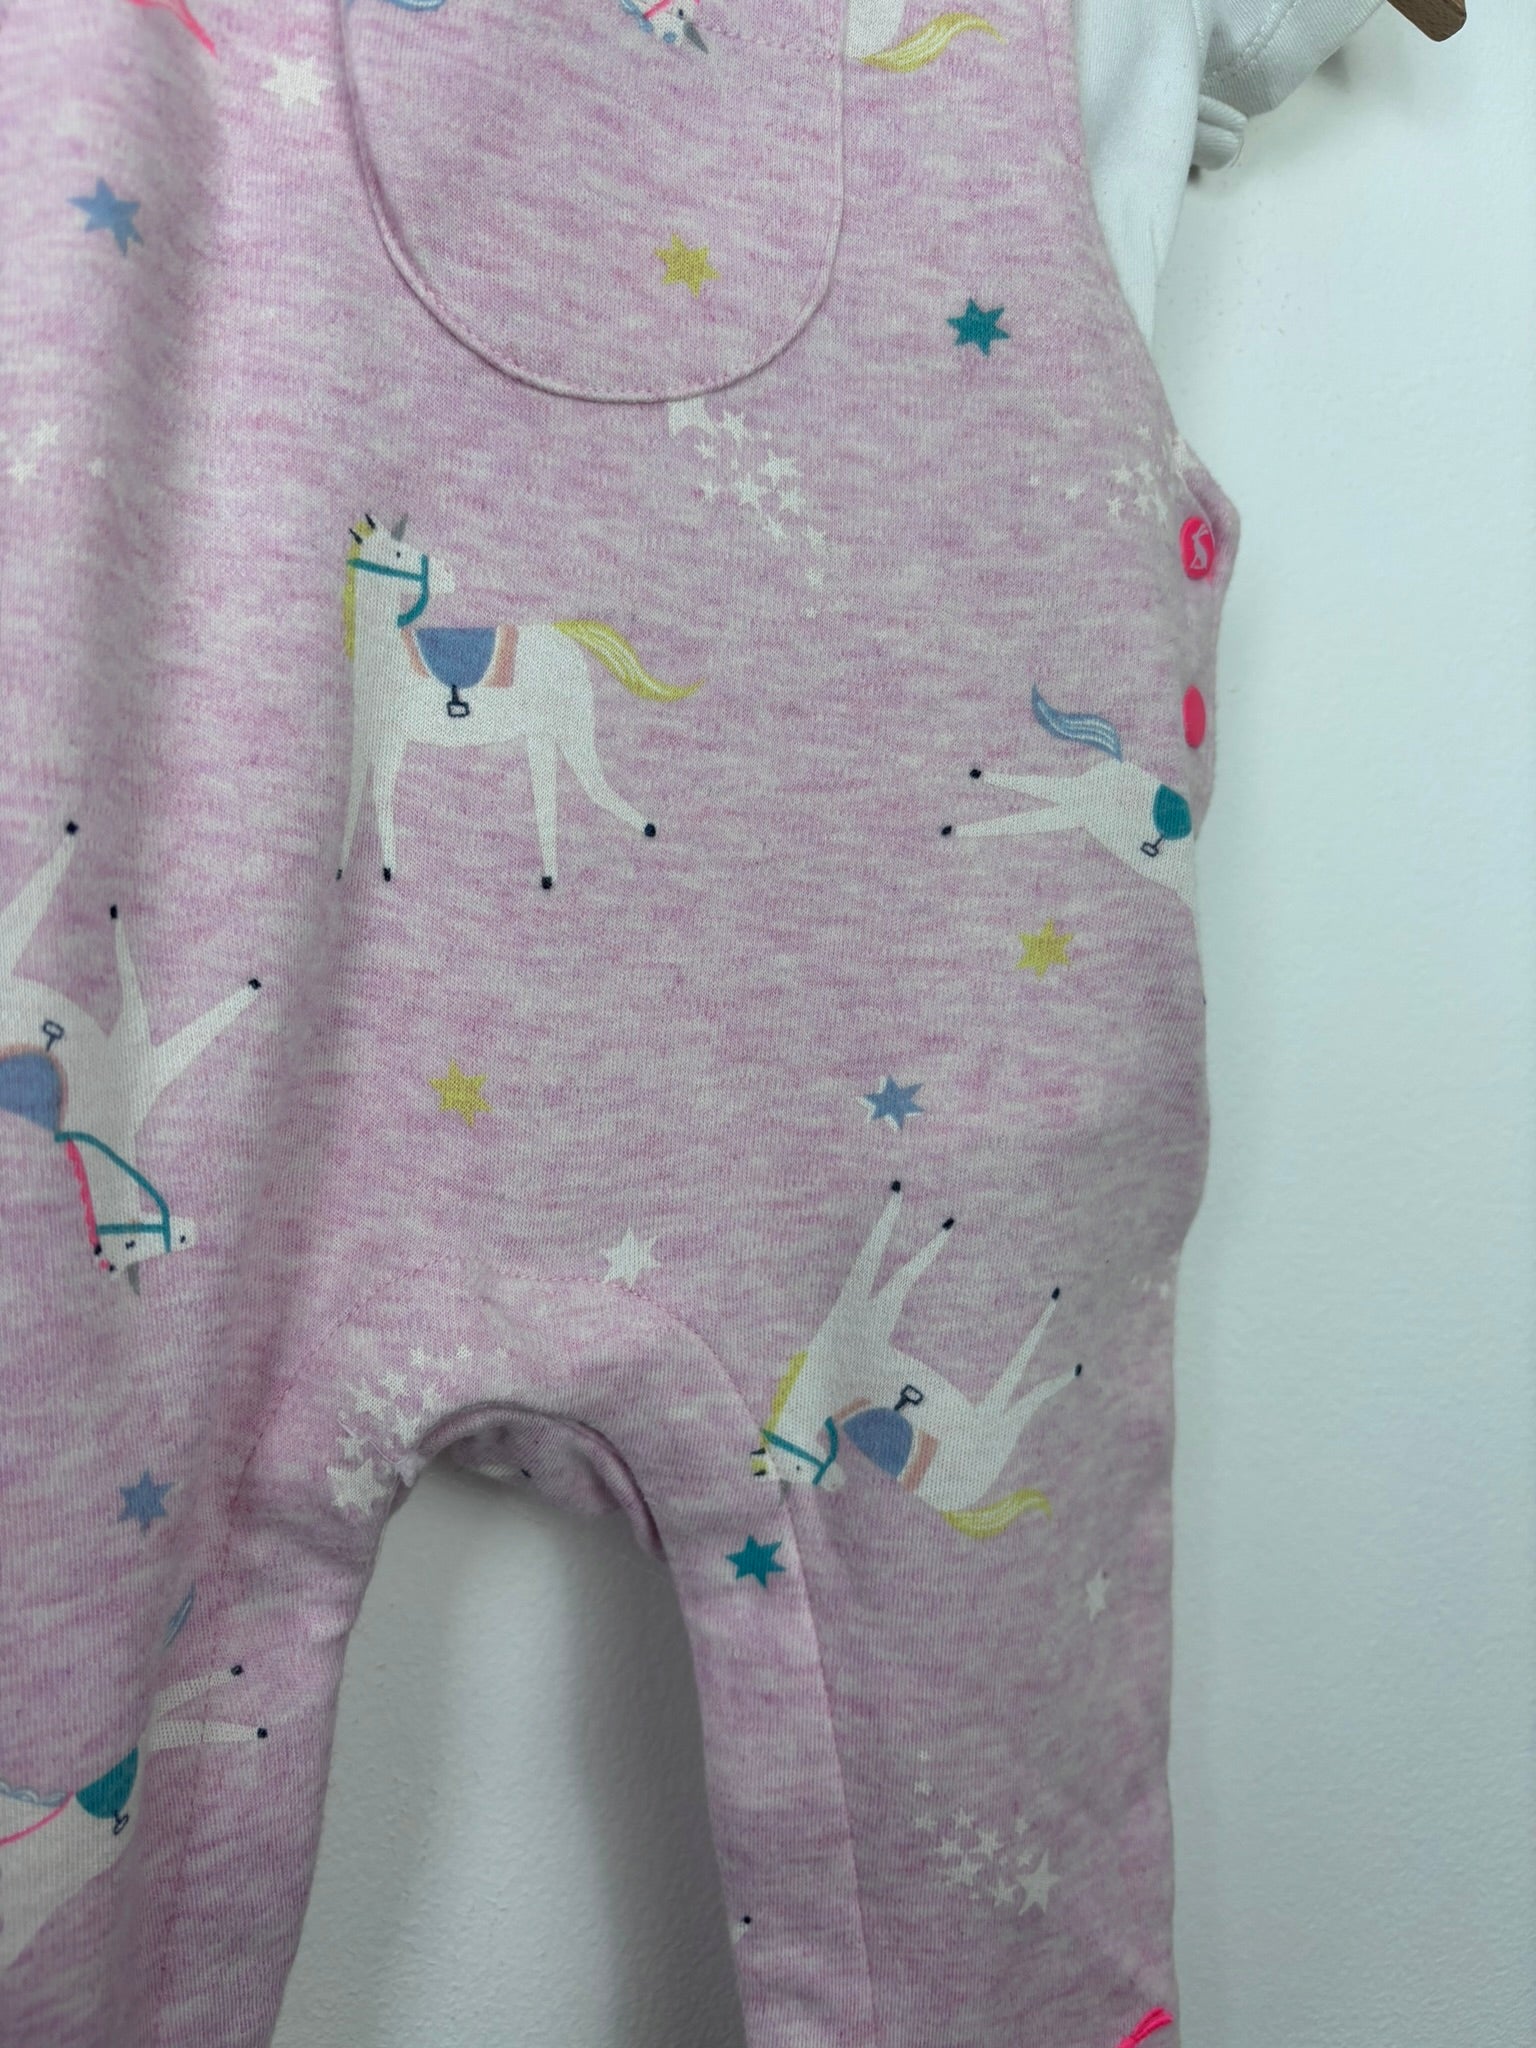 Joules Up To 3 Months-Dungarees-Second Snuggle Preloved